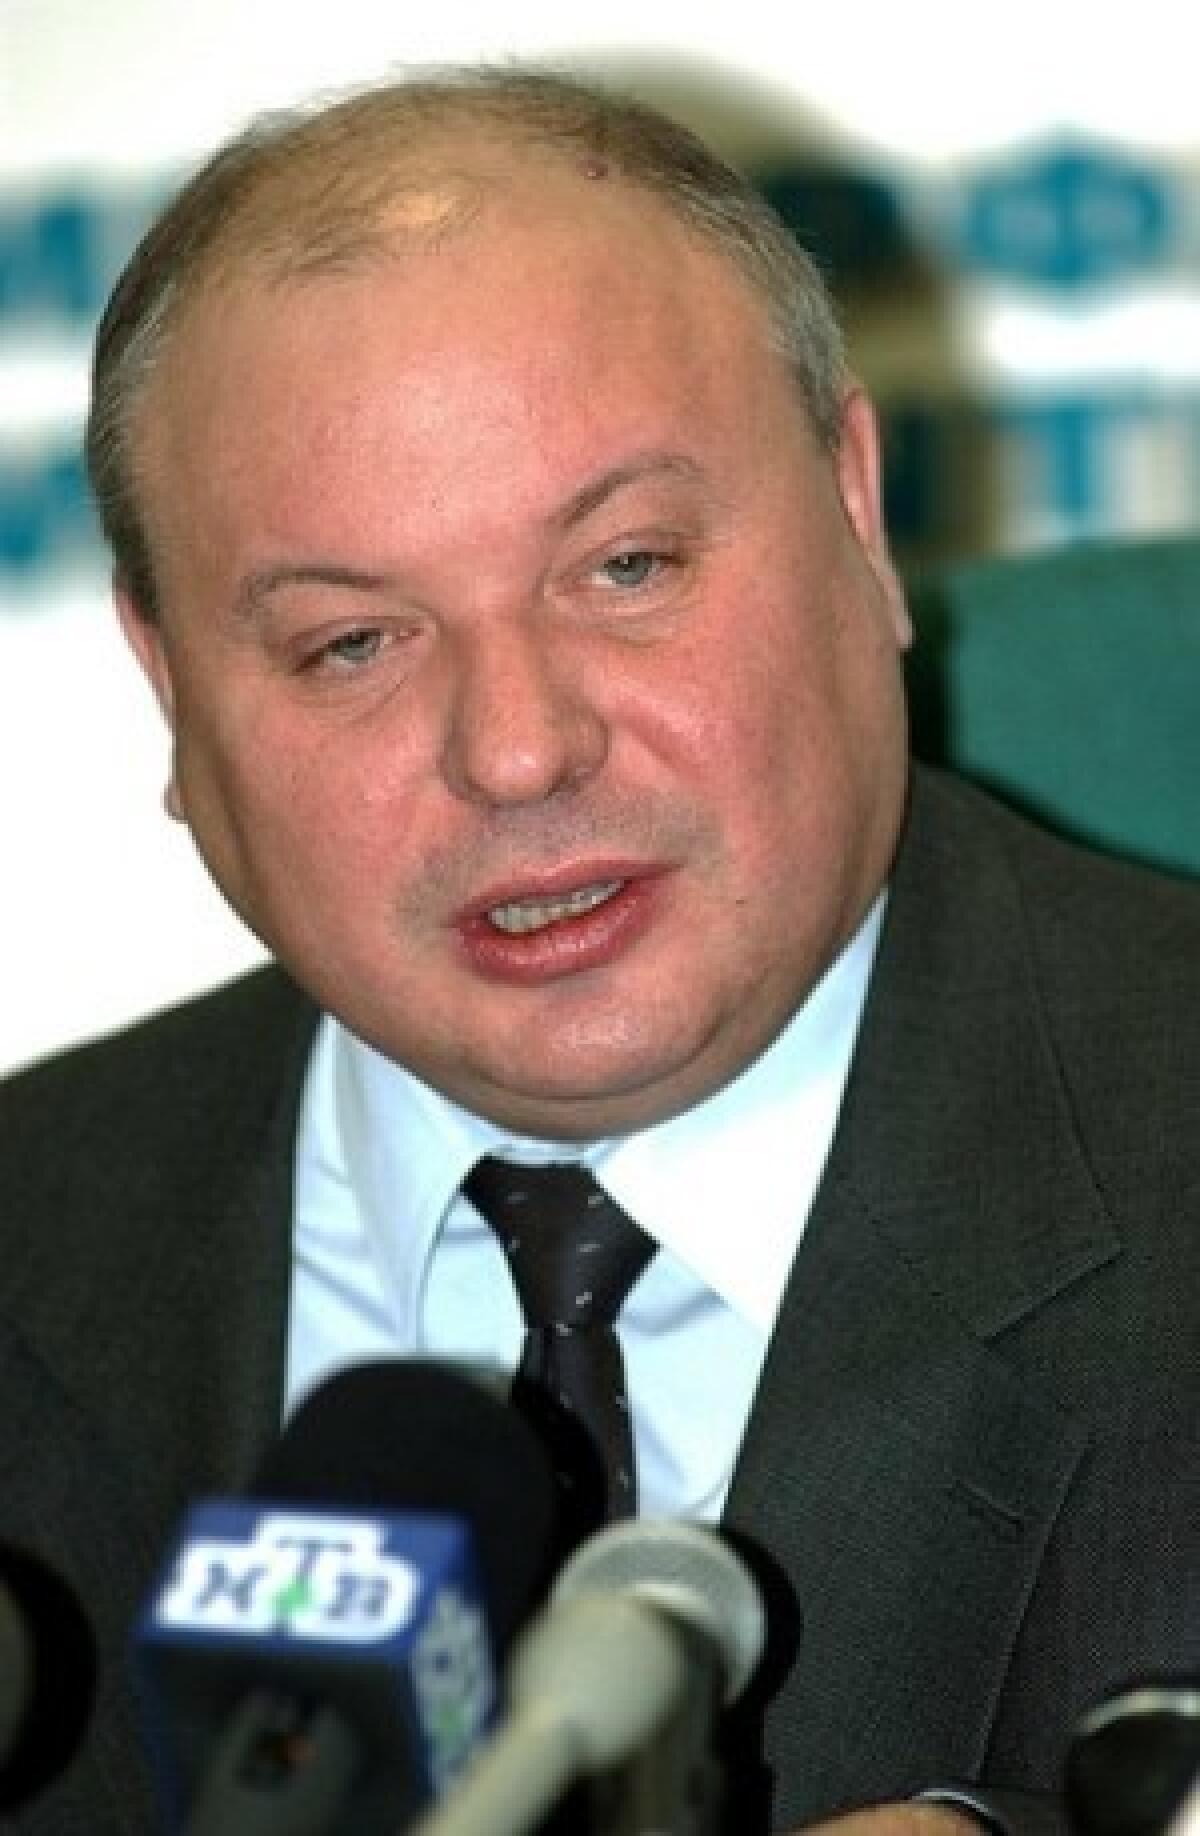 Economist Yegor Gaidar was widely disliked in Russia because of his role in transitioning the country from communism to a free-market economy after the fall of the Soviet Union.